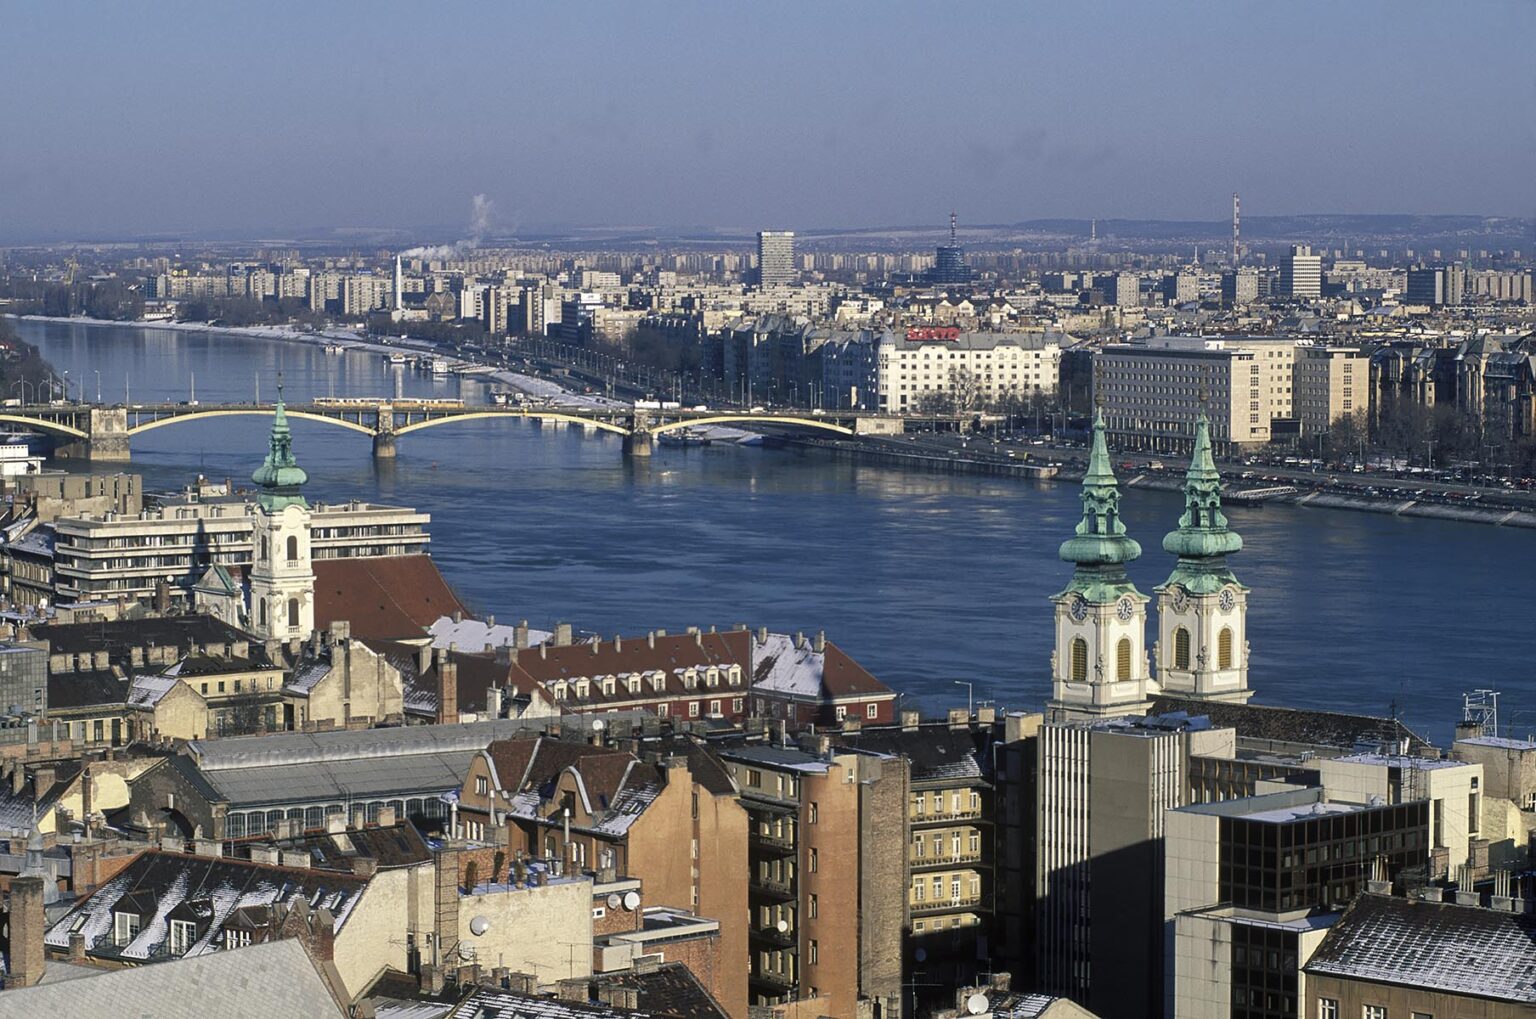 View of PEST looking across the DANUBE RIVER from BUDA - BUDAPEST, HUNGARY